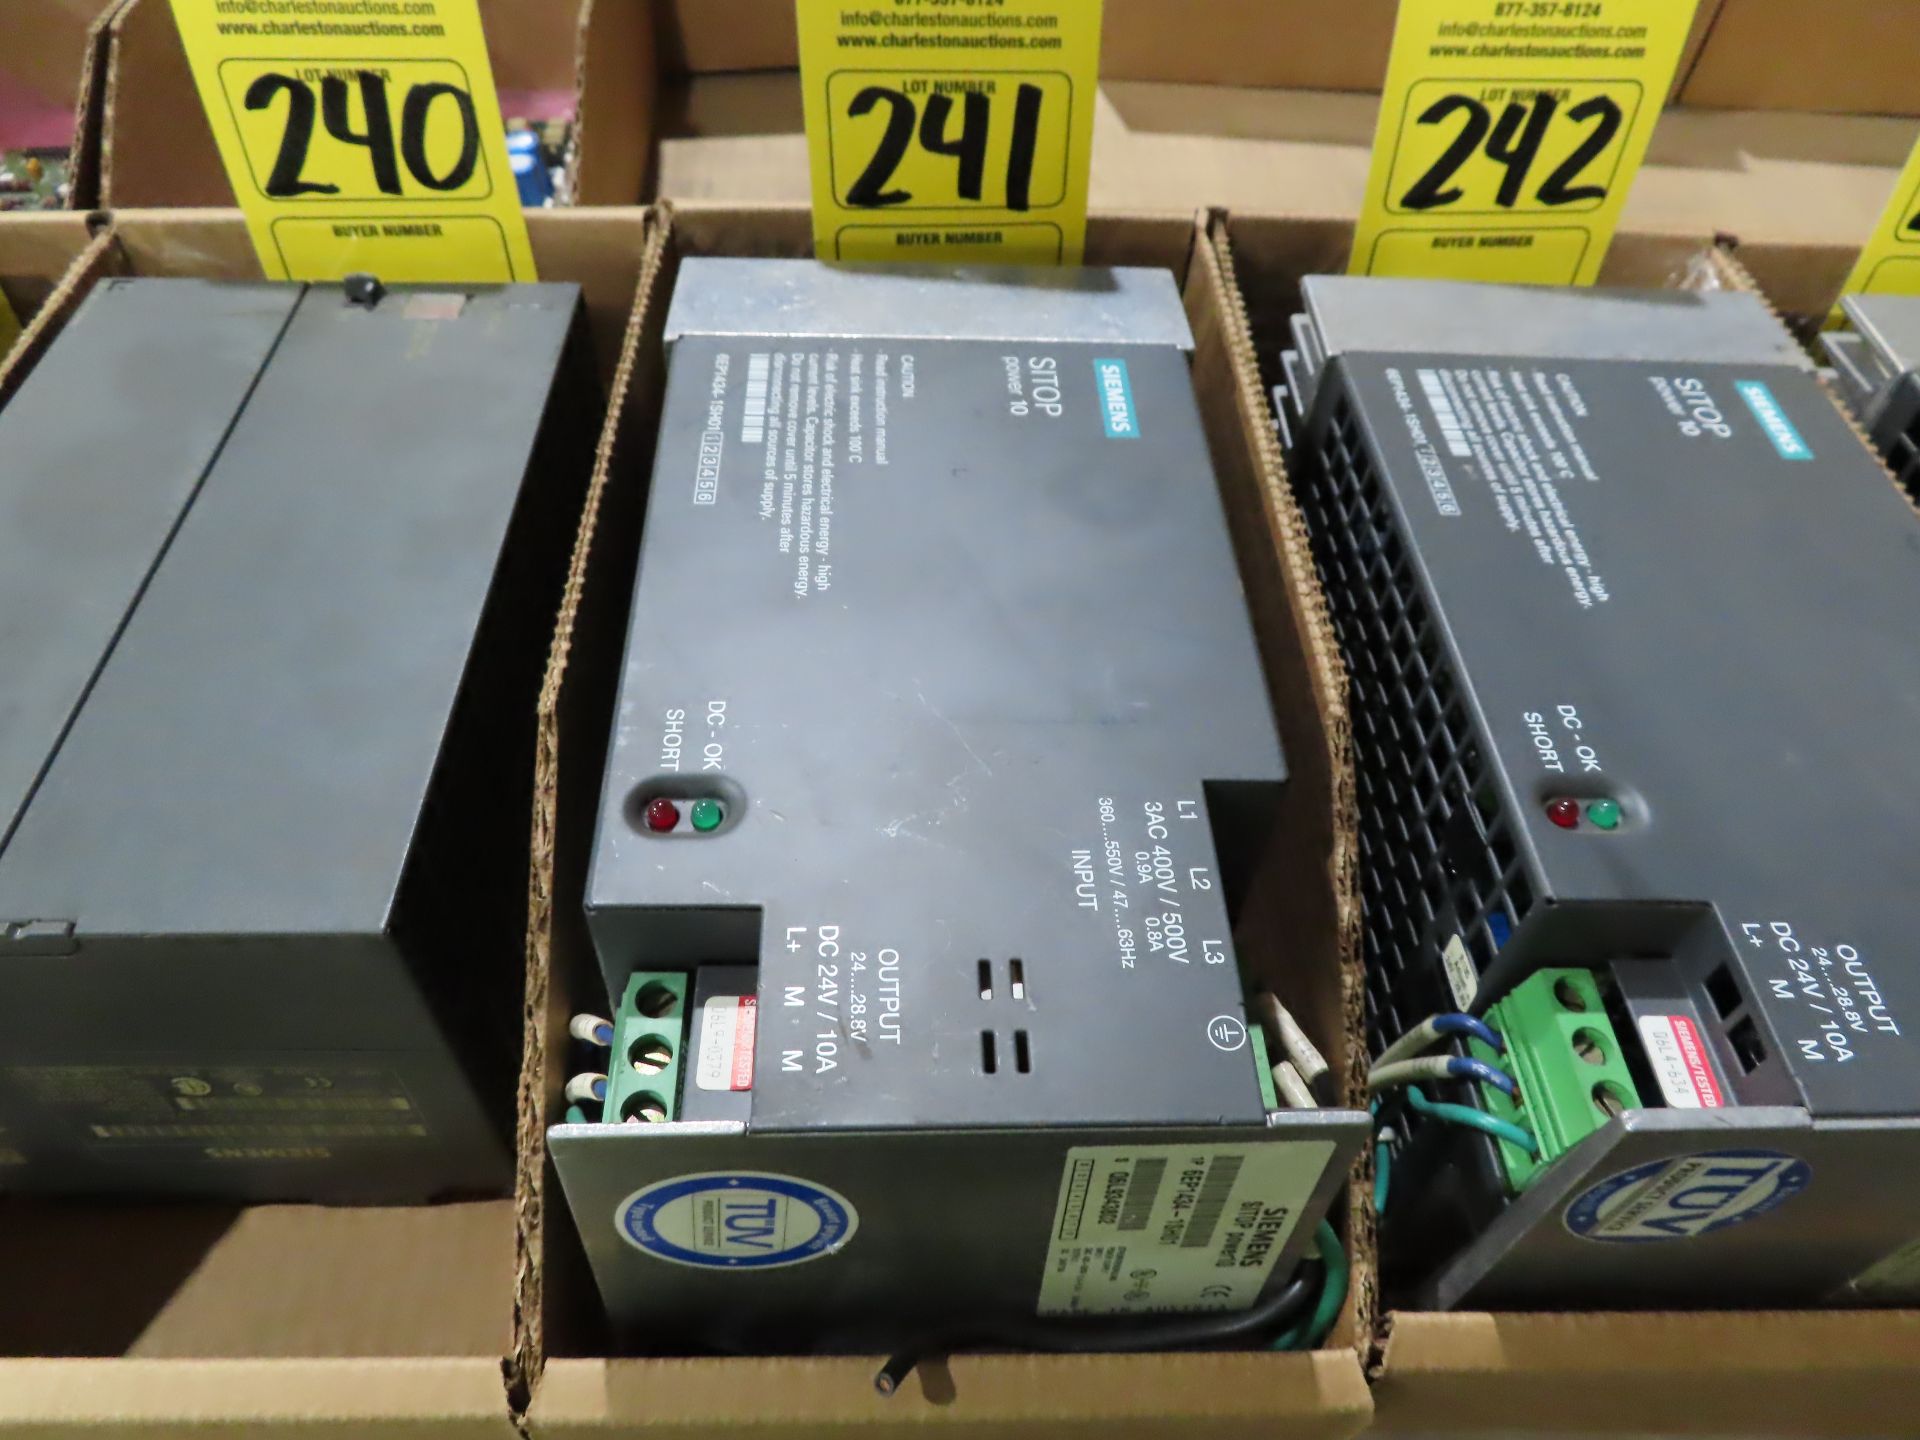 Siemens model 6EP1434-1SH01 power supply, as always, with Brolyn LLC auctions, all lots can be